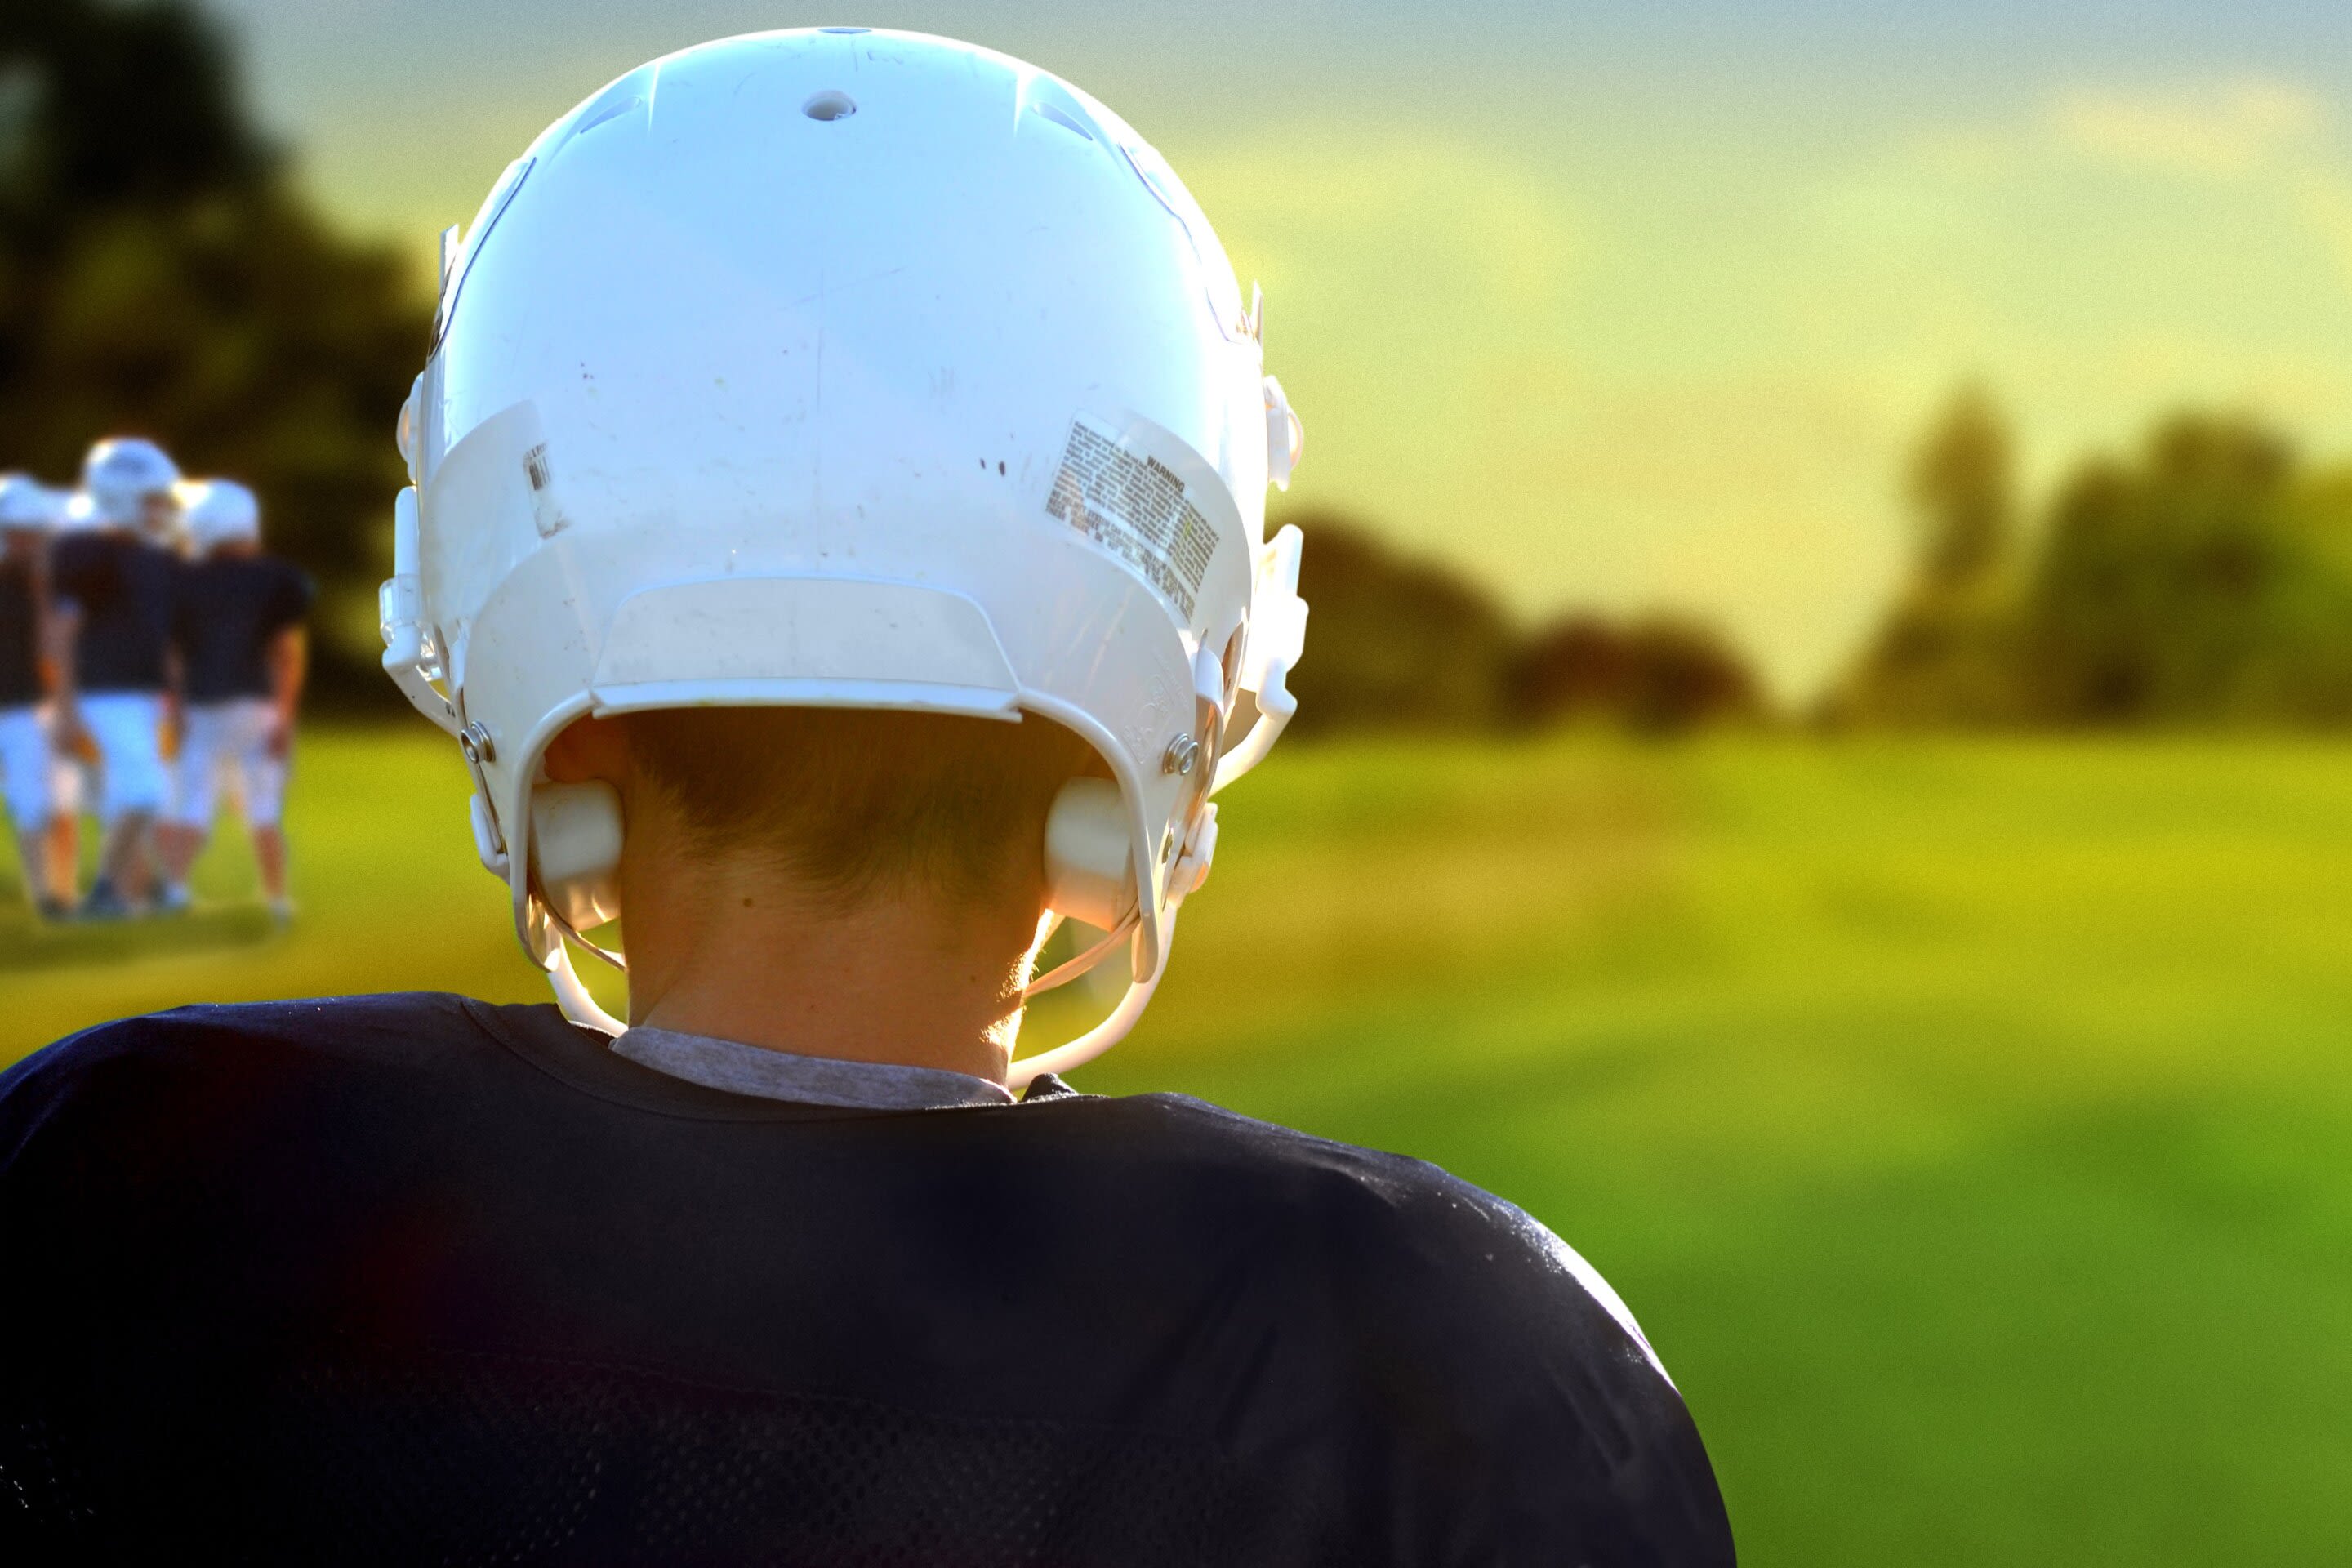 Concussion experts warn term used to describe head impacts—'subconcussion'—is misleading and dangerous